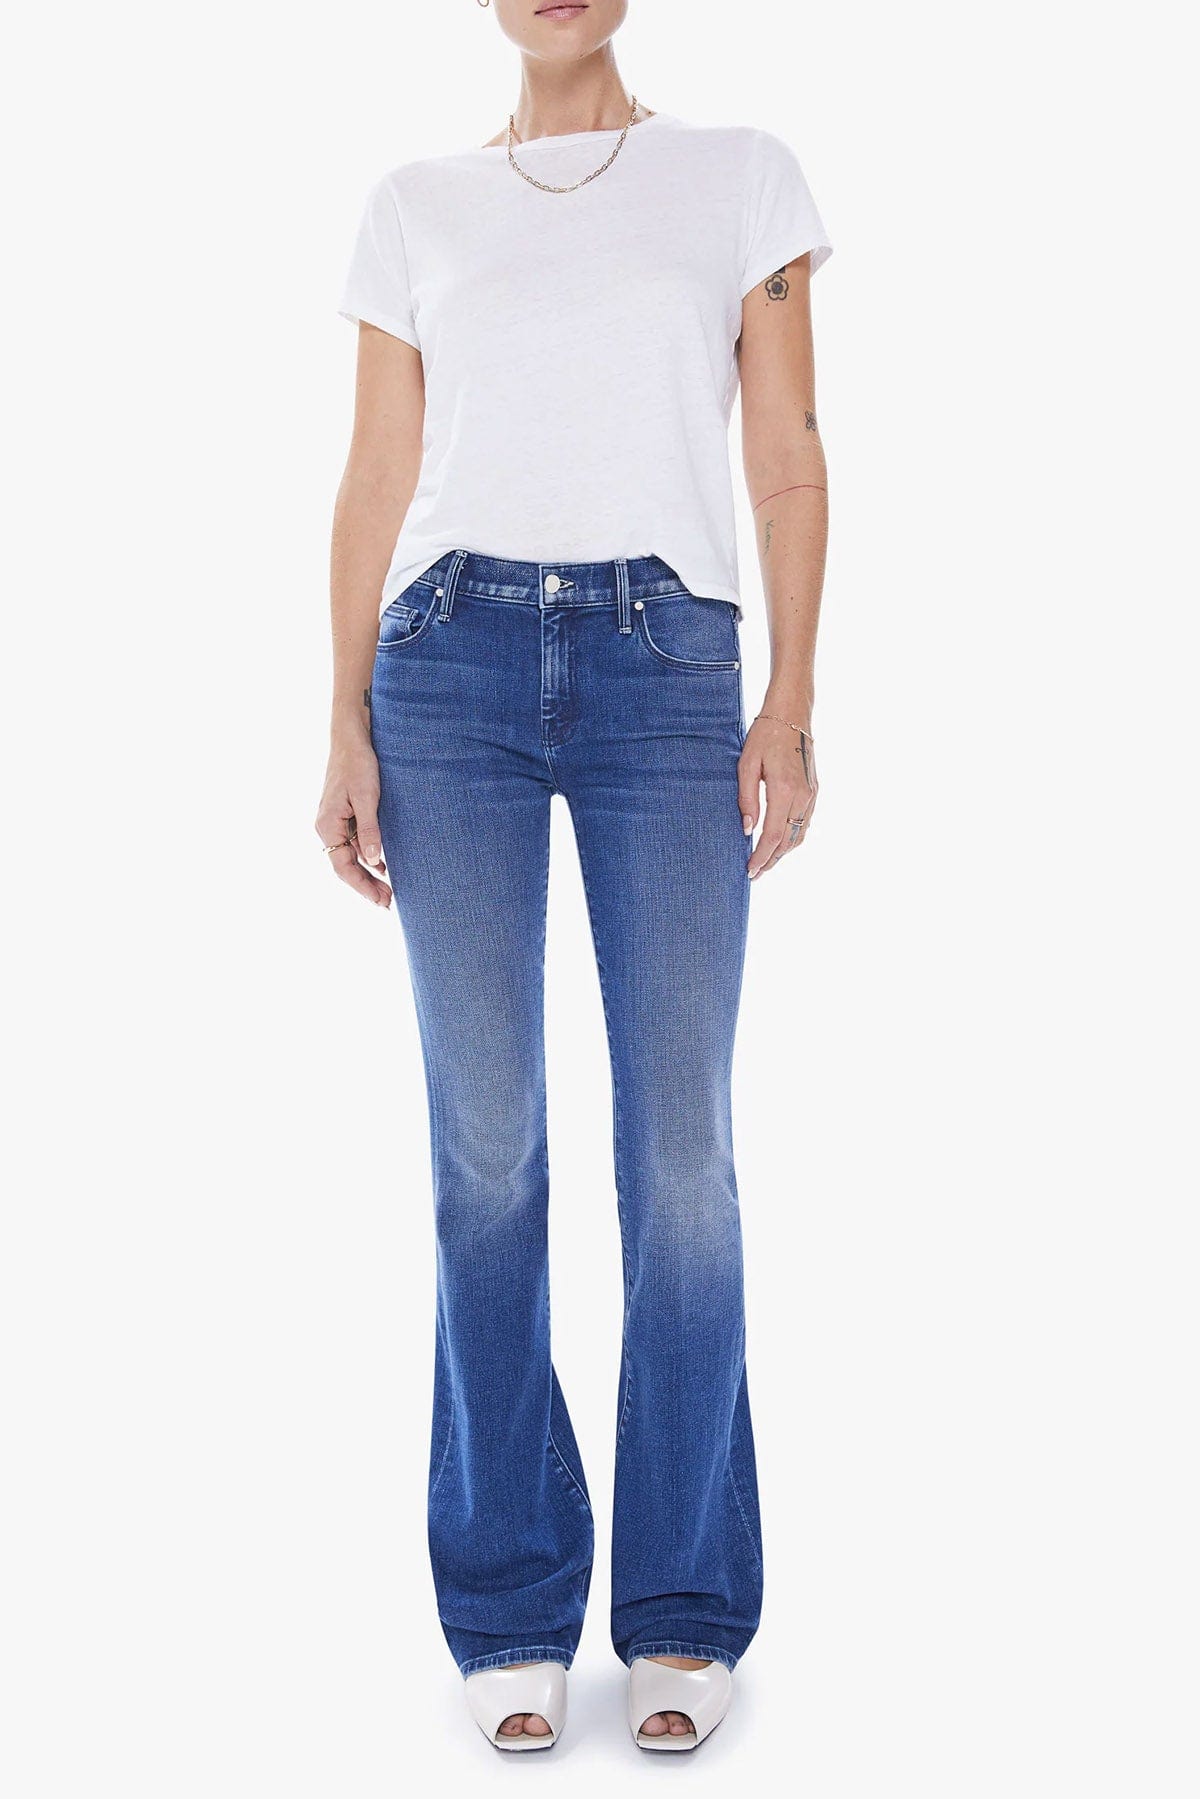 MOTHER PANTALONE IN DENIM  BLUE JEANS / 23 Jeans Donna Mother The Down Low Weekender Heel